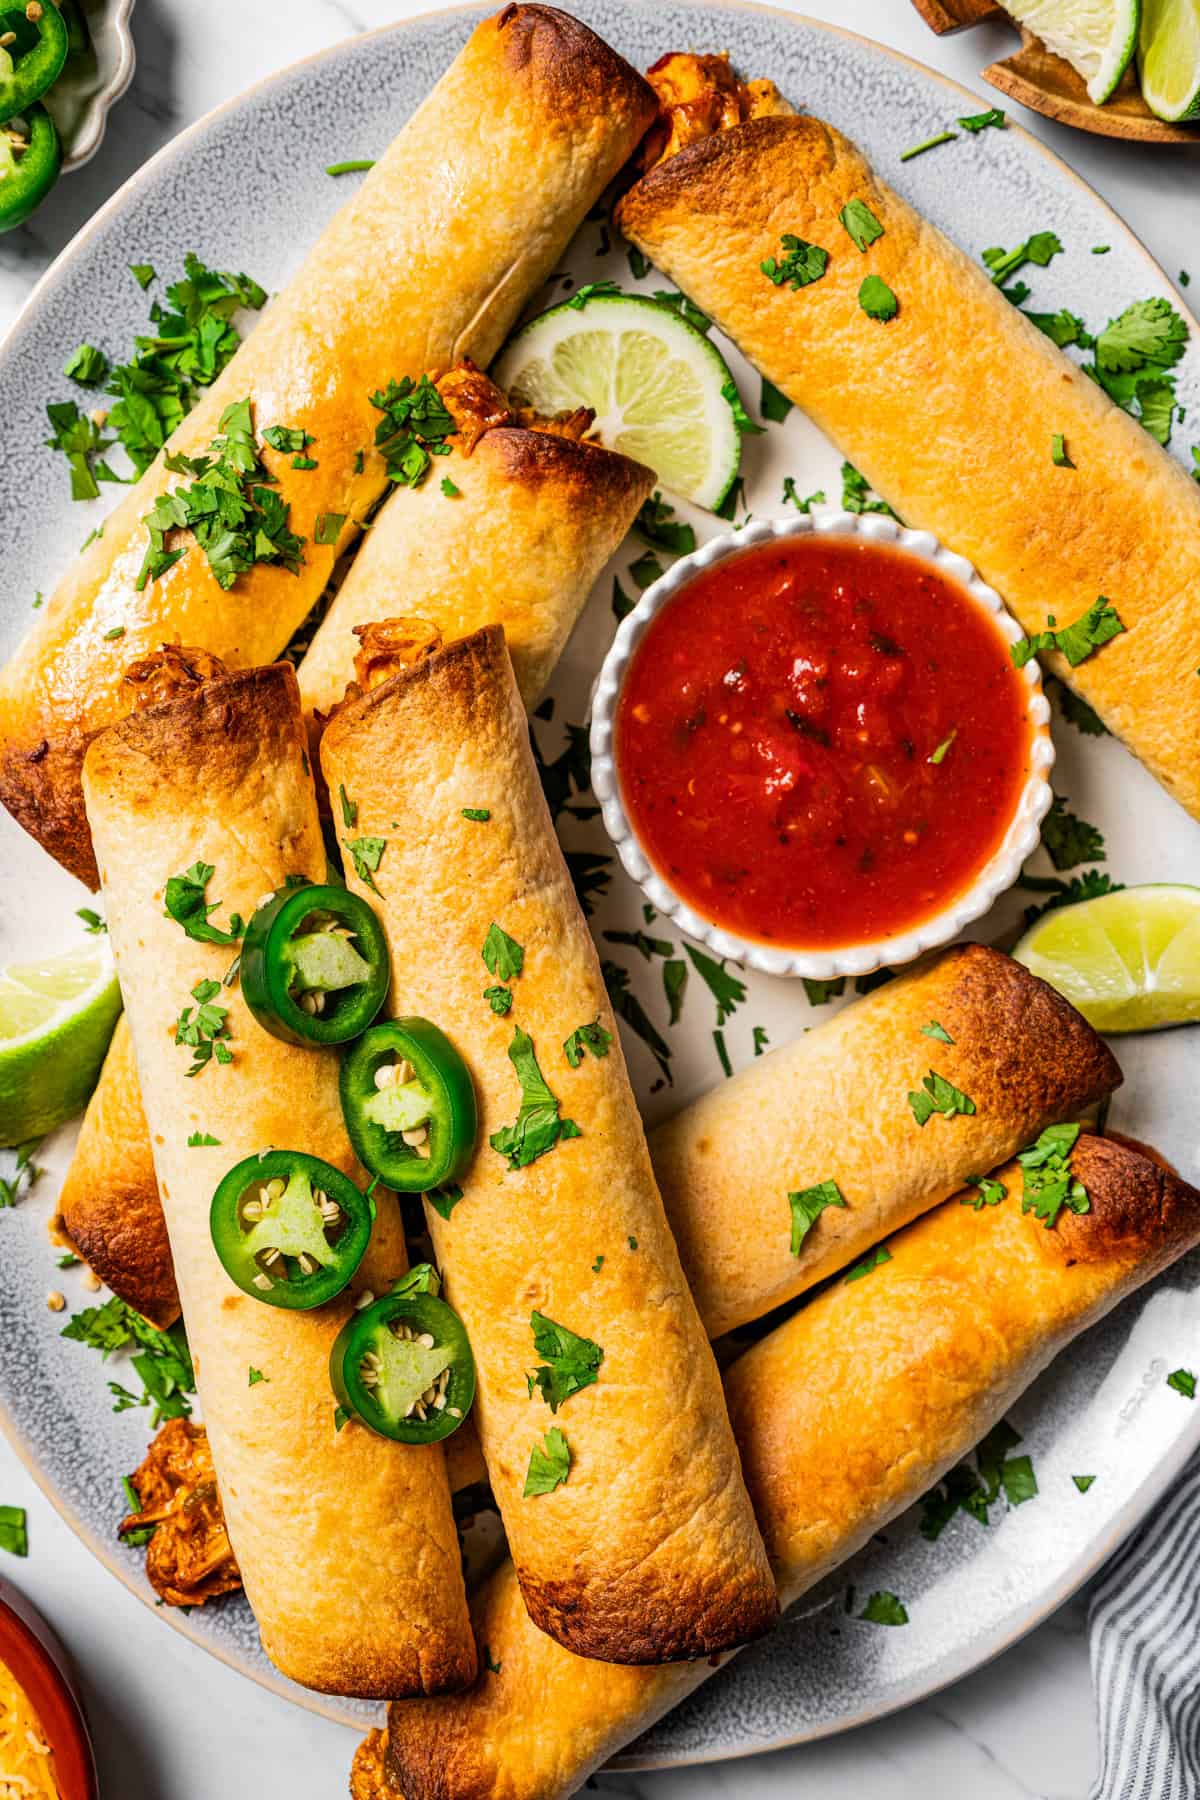 Chicken flautas arranged on a serving platter with a bowl of tomato salsa.